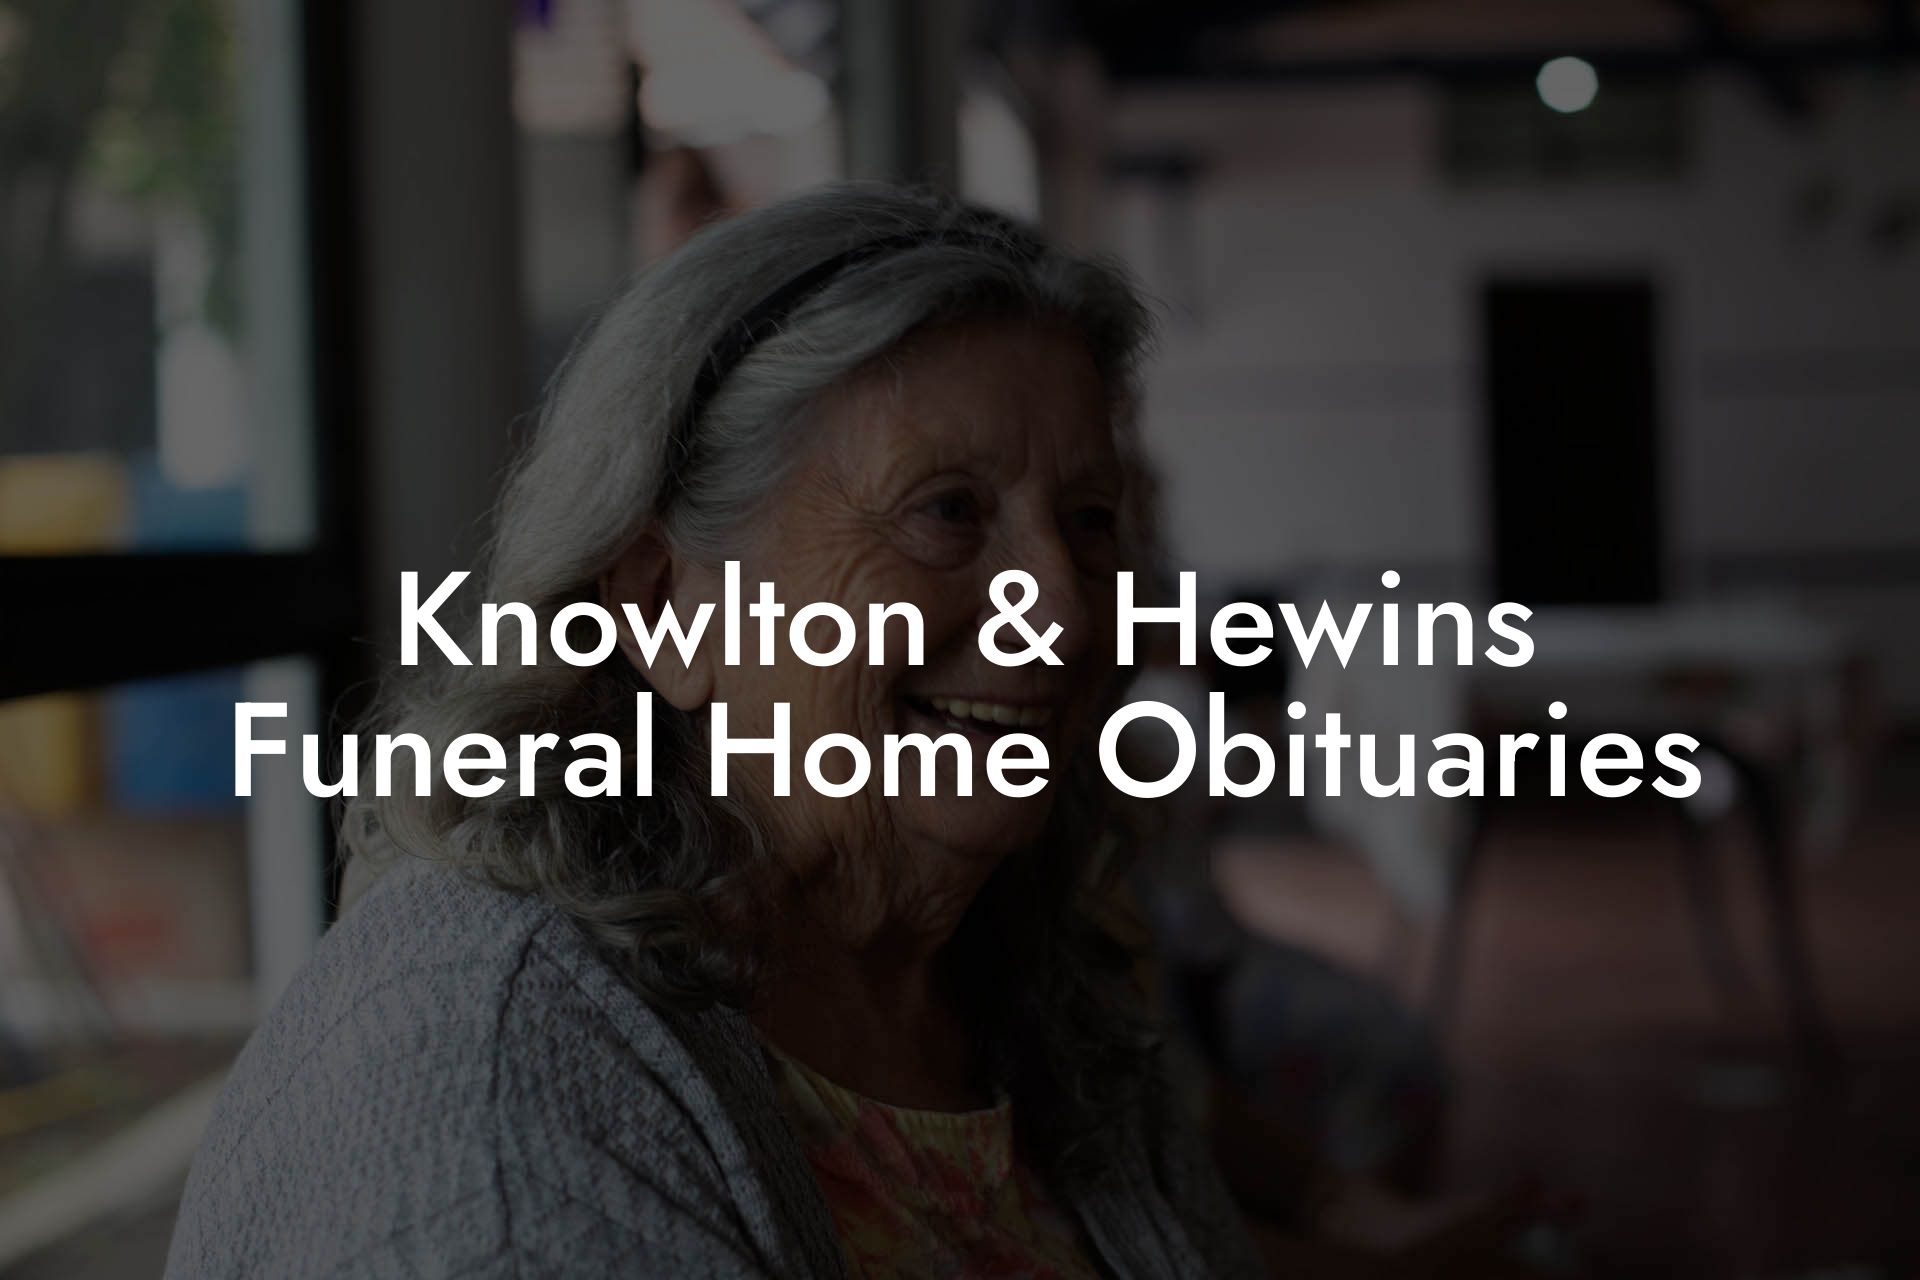 Knowlton & Hewins Funeral Home Obituaries